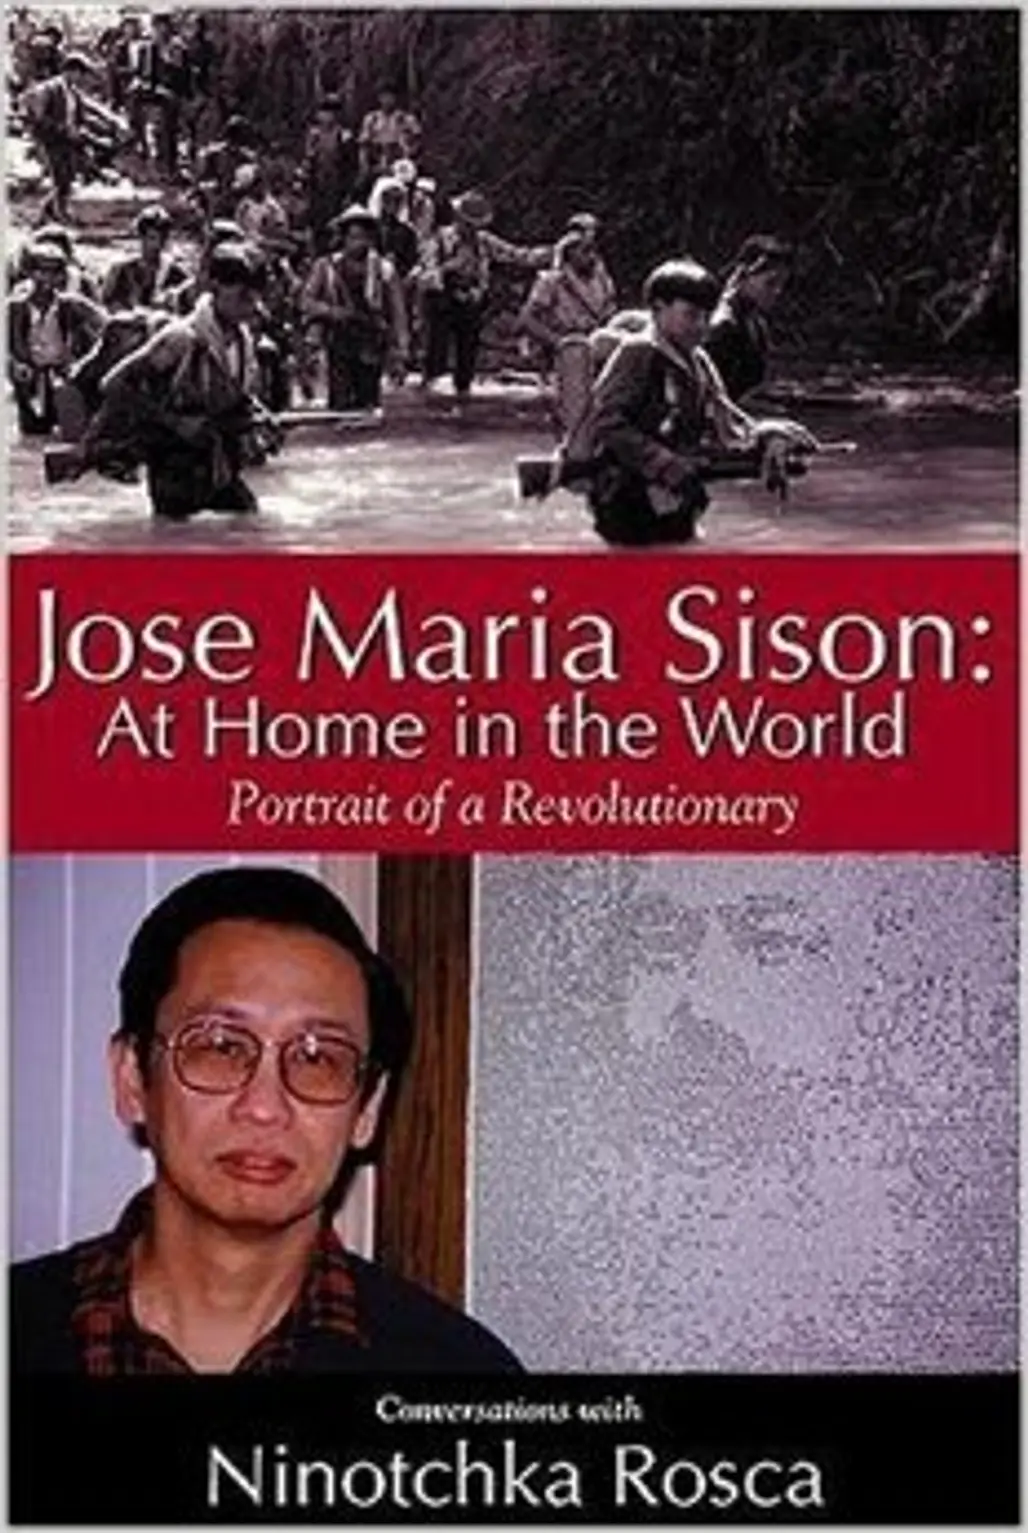 Jose Maria Sison: at Home in the World – Portrait of a Revolutionary